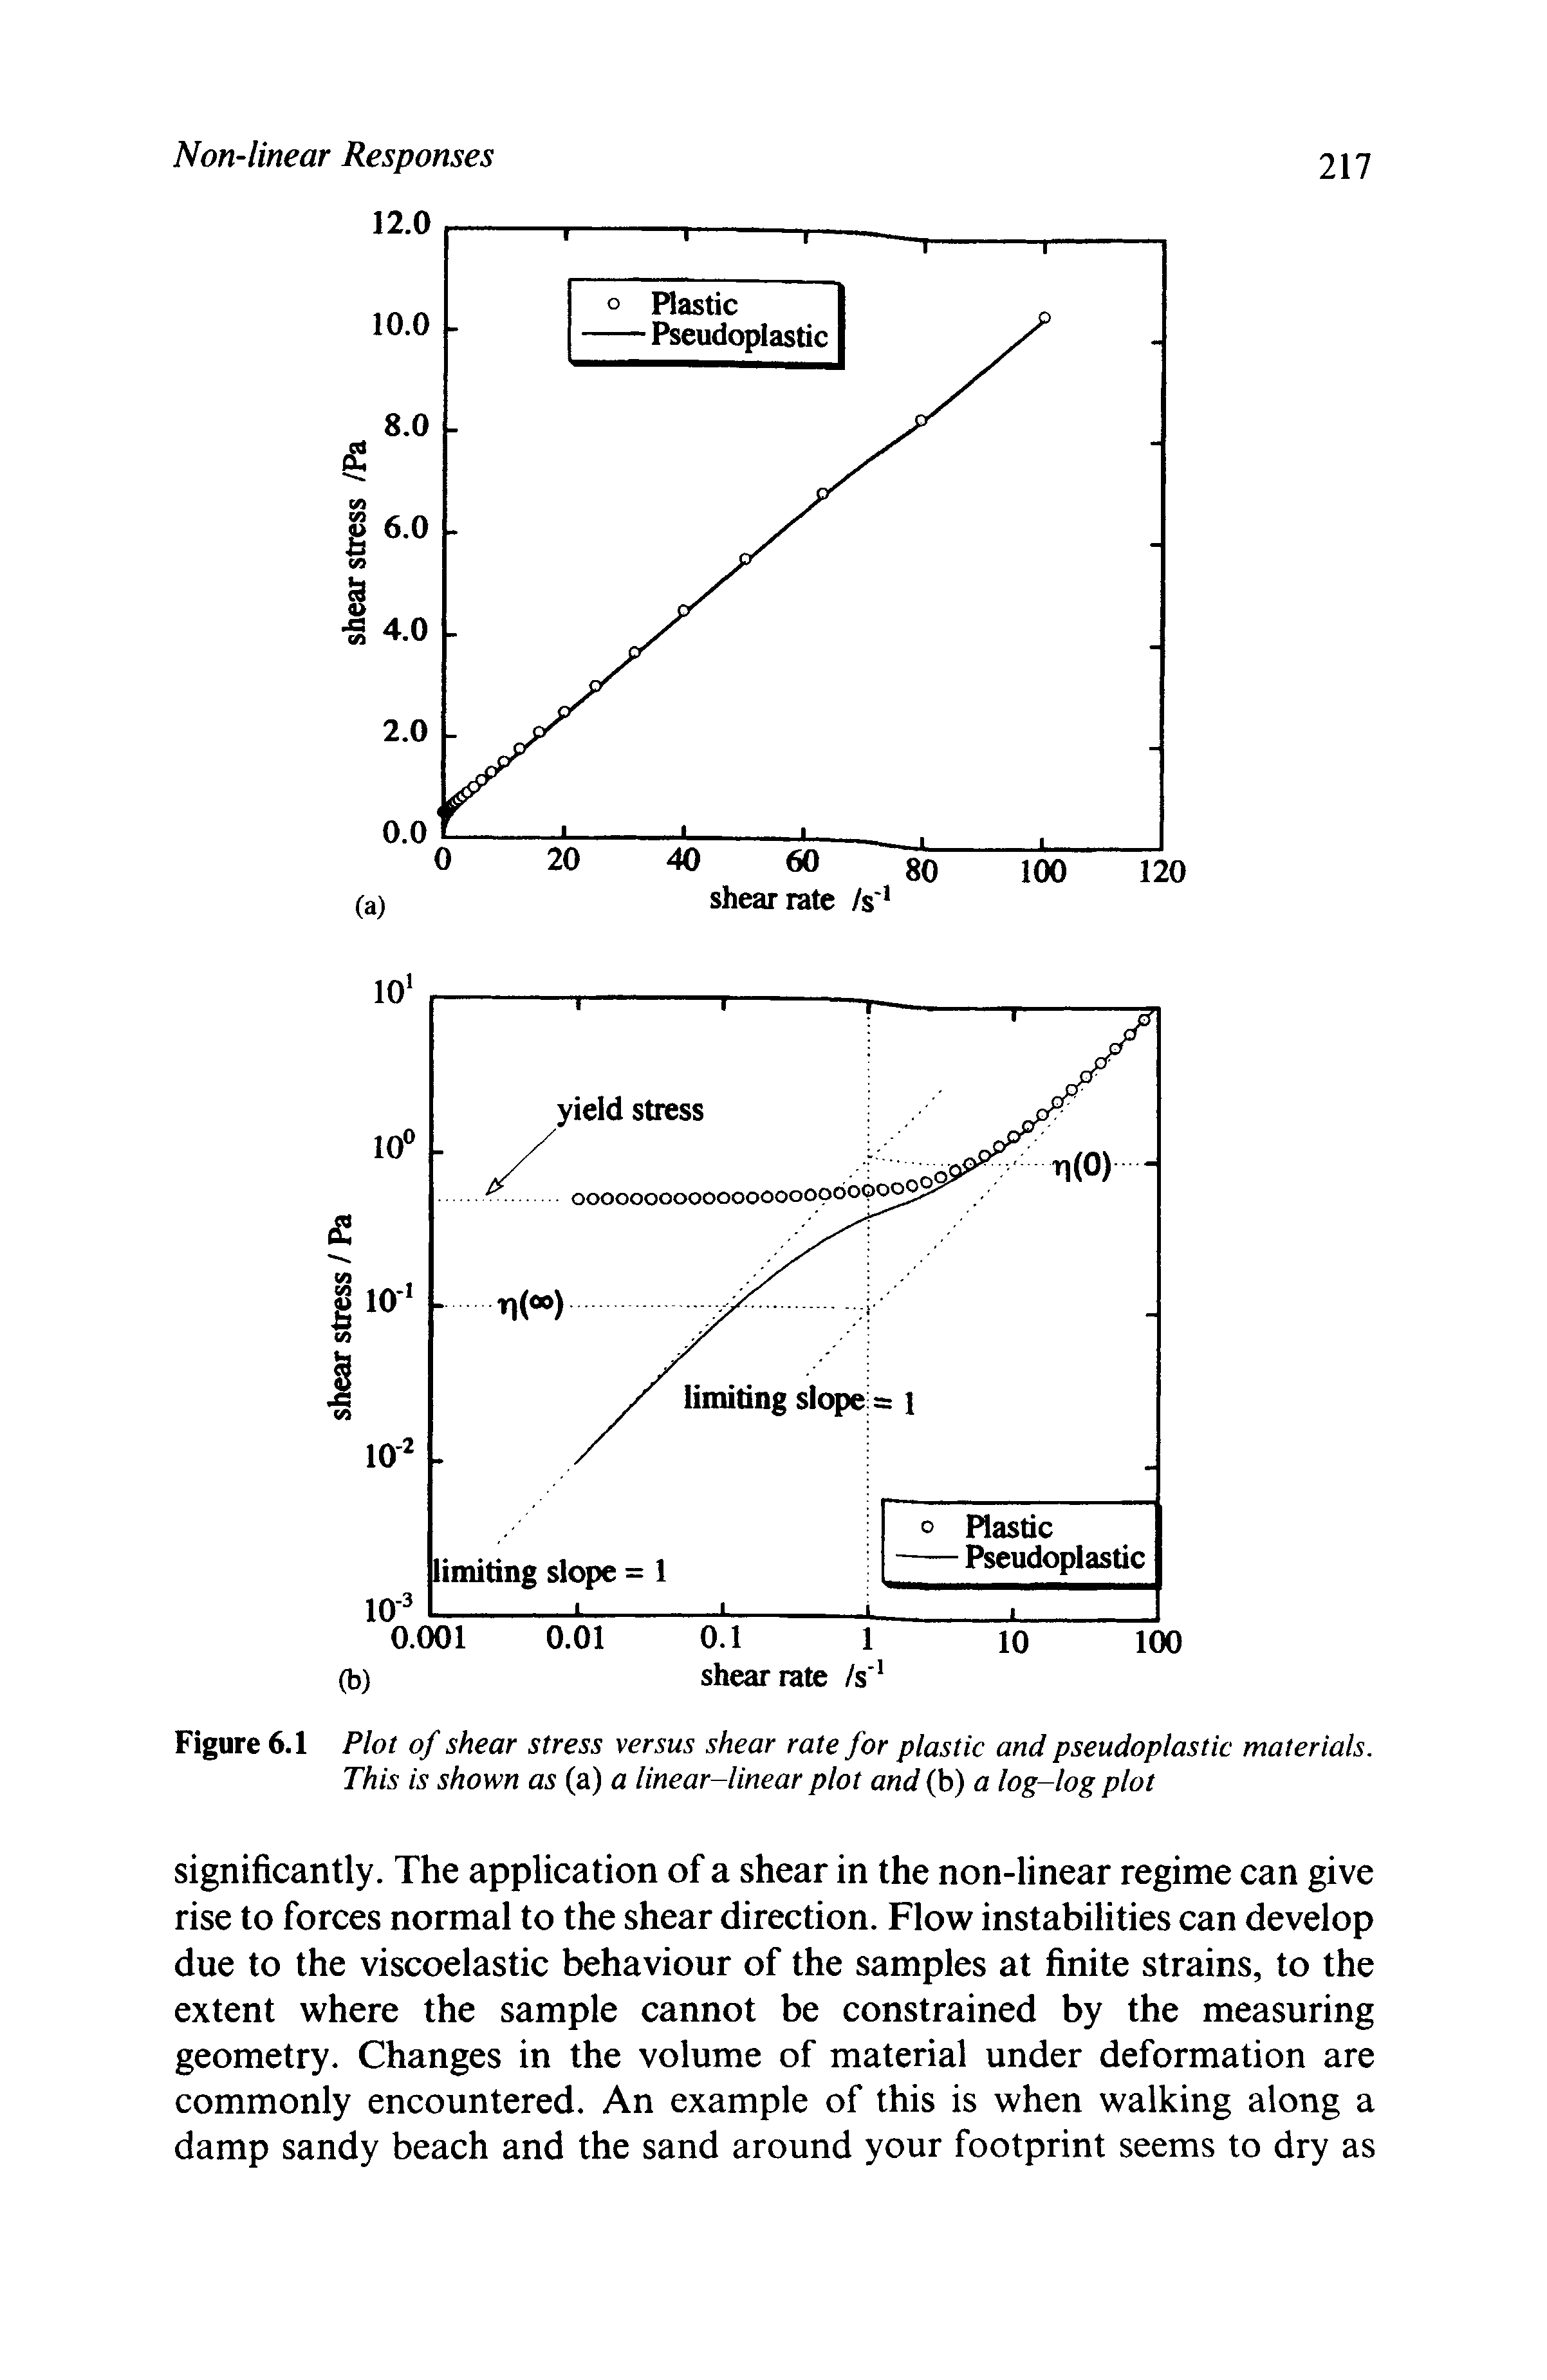 Figure 6.1 Plot of shear stress versus shear rate for plastic and pseudoplastic materials. This is shown as (a) a linear-linear plot and (b) a log-log plot...